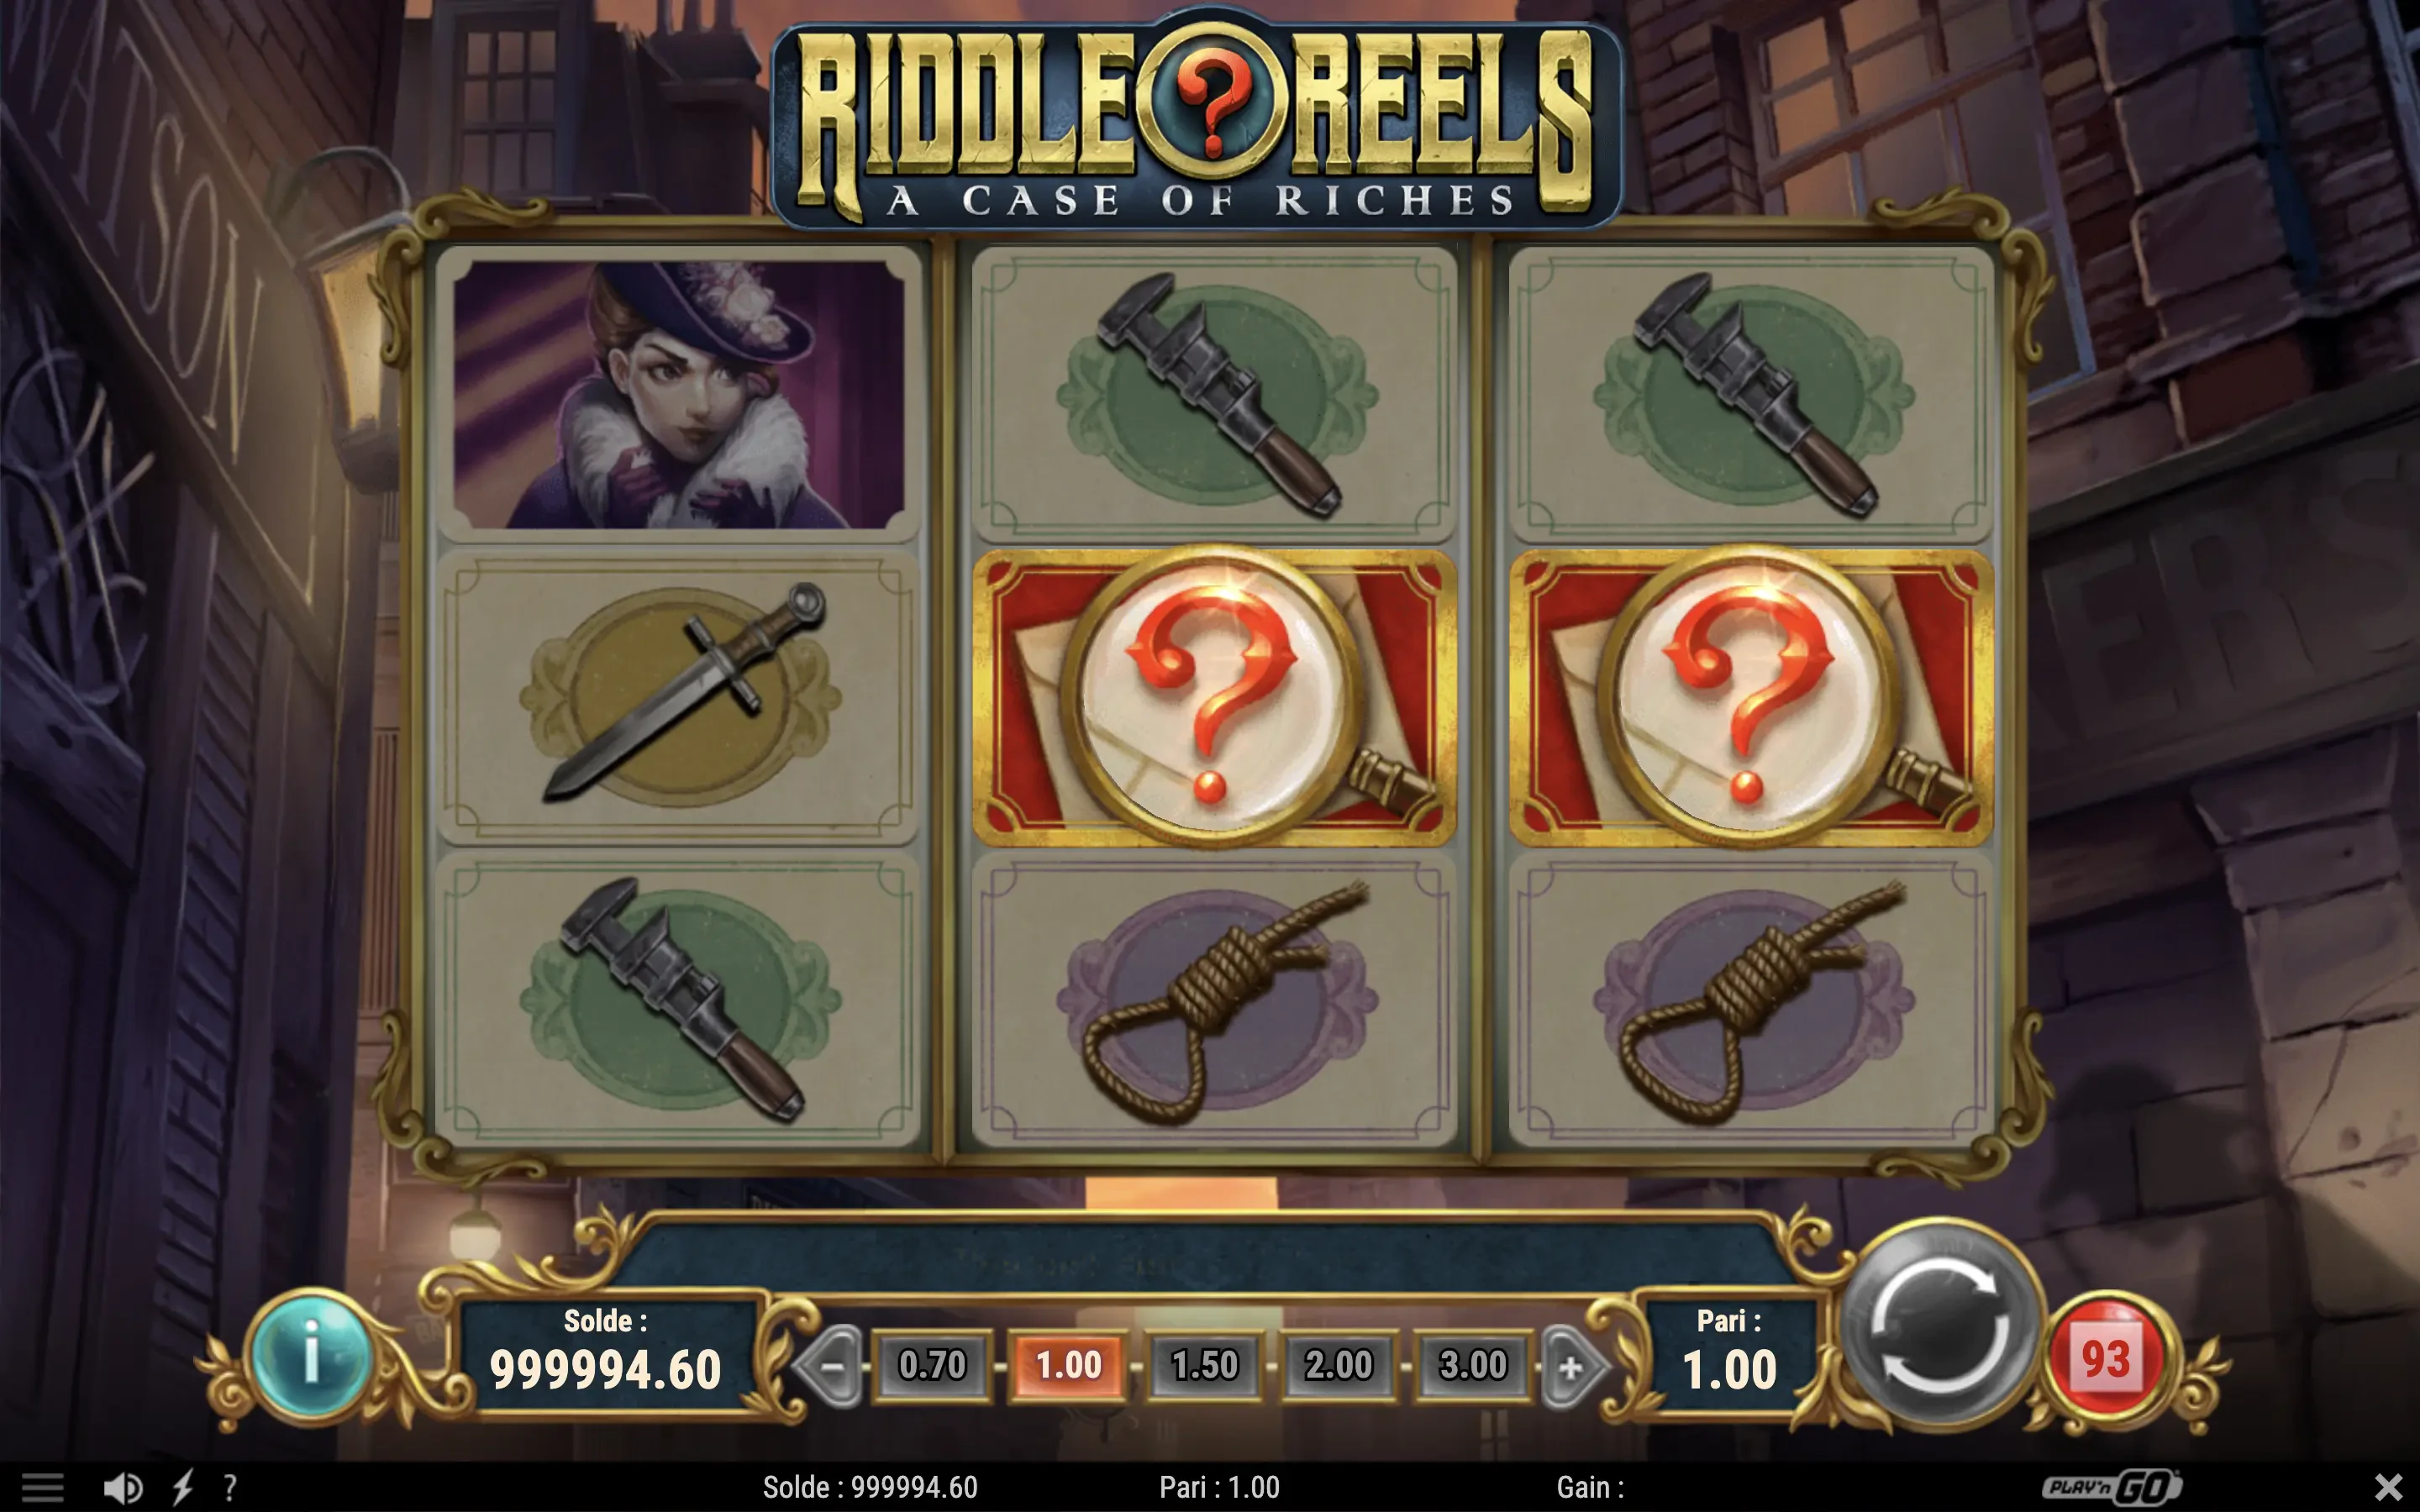 Riddle Reels: A Case of Riches feature